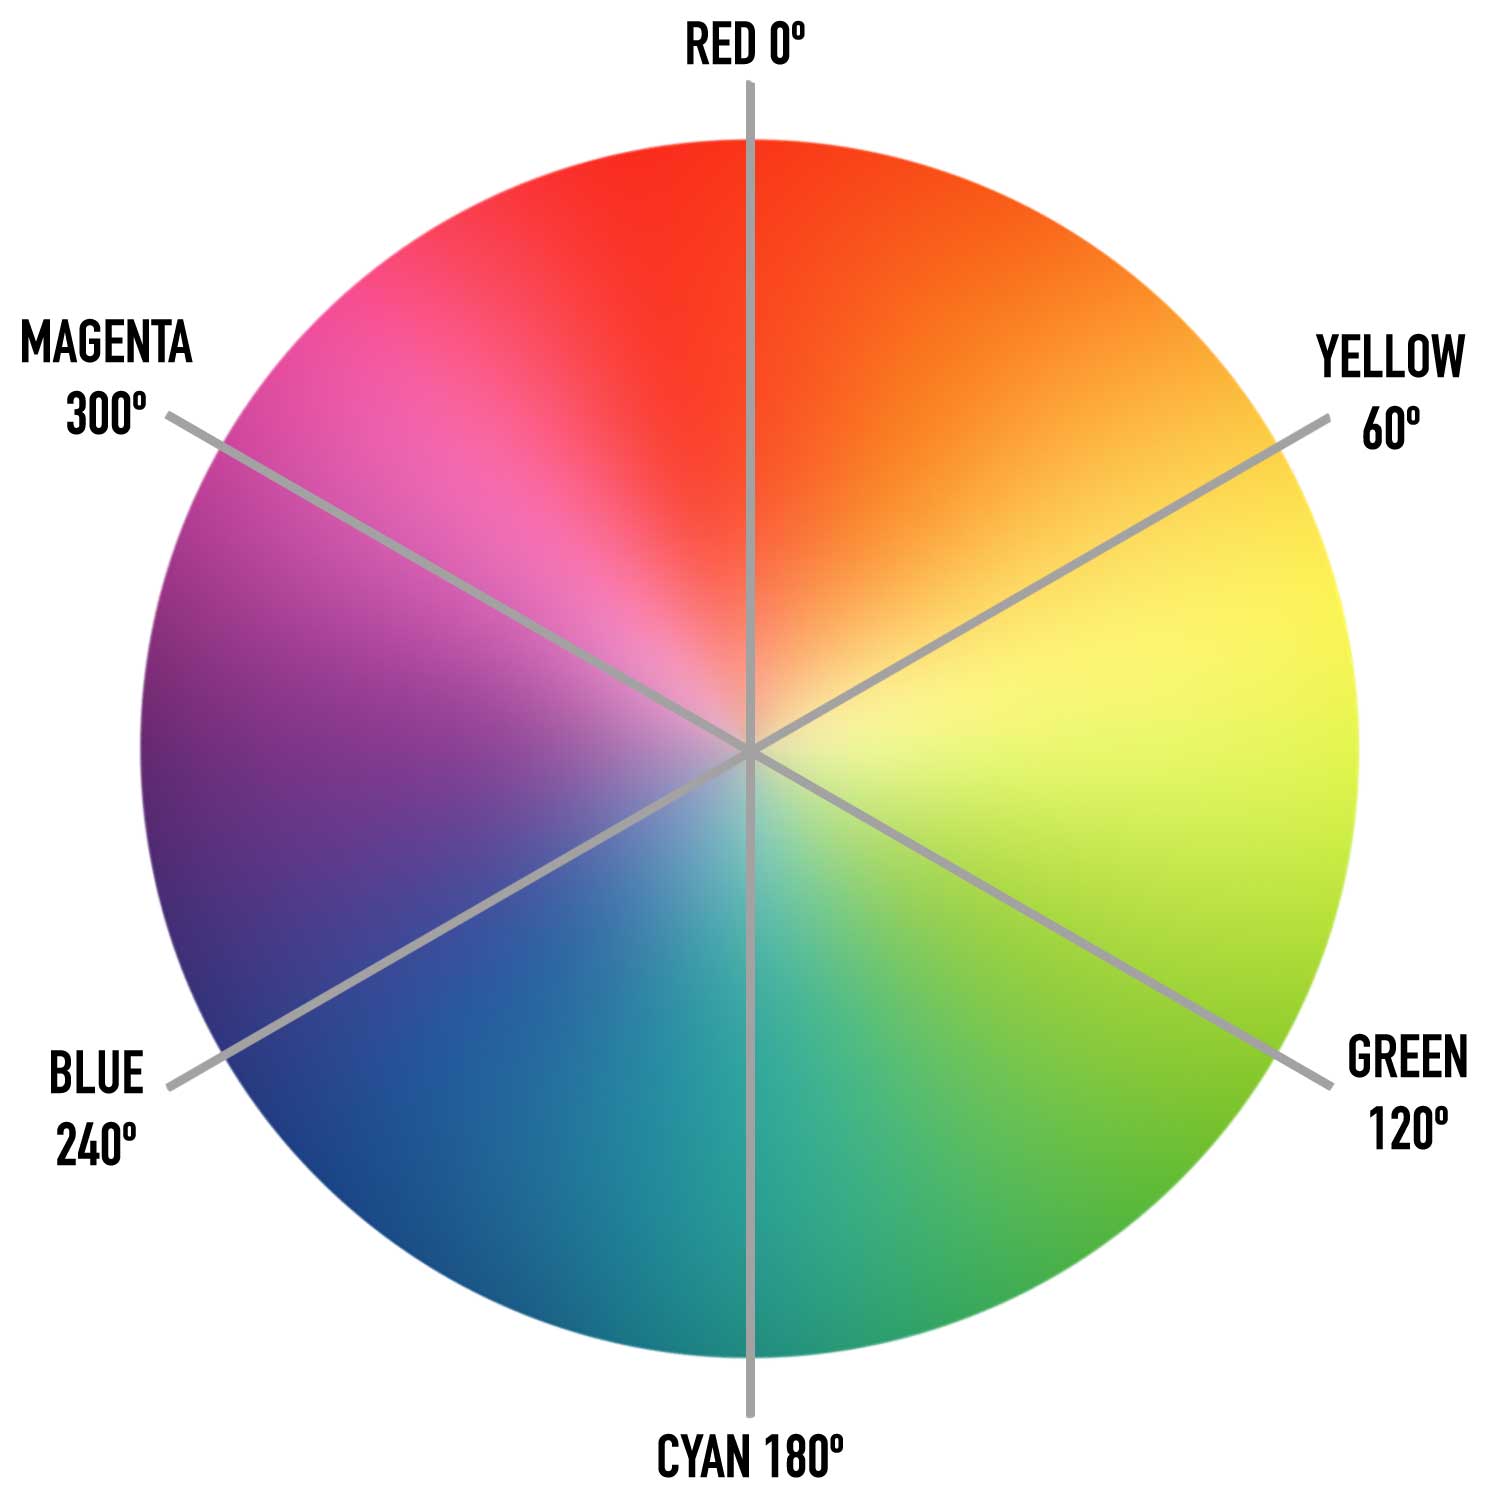 Defining Colors in CSS